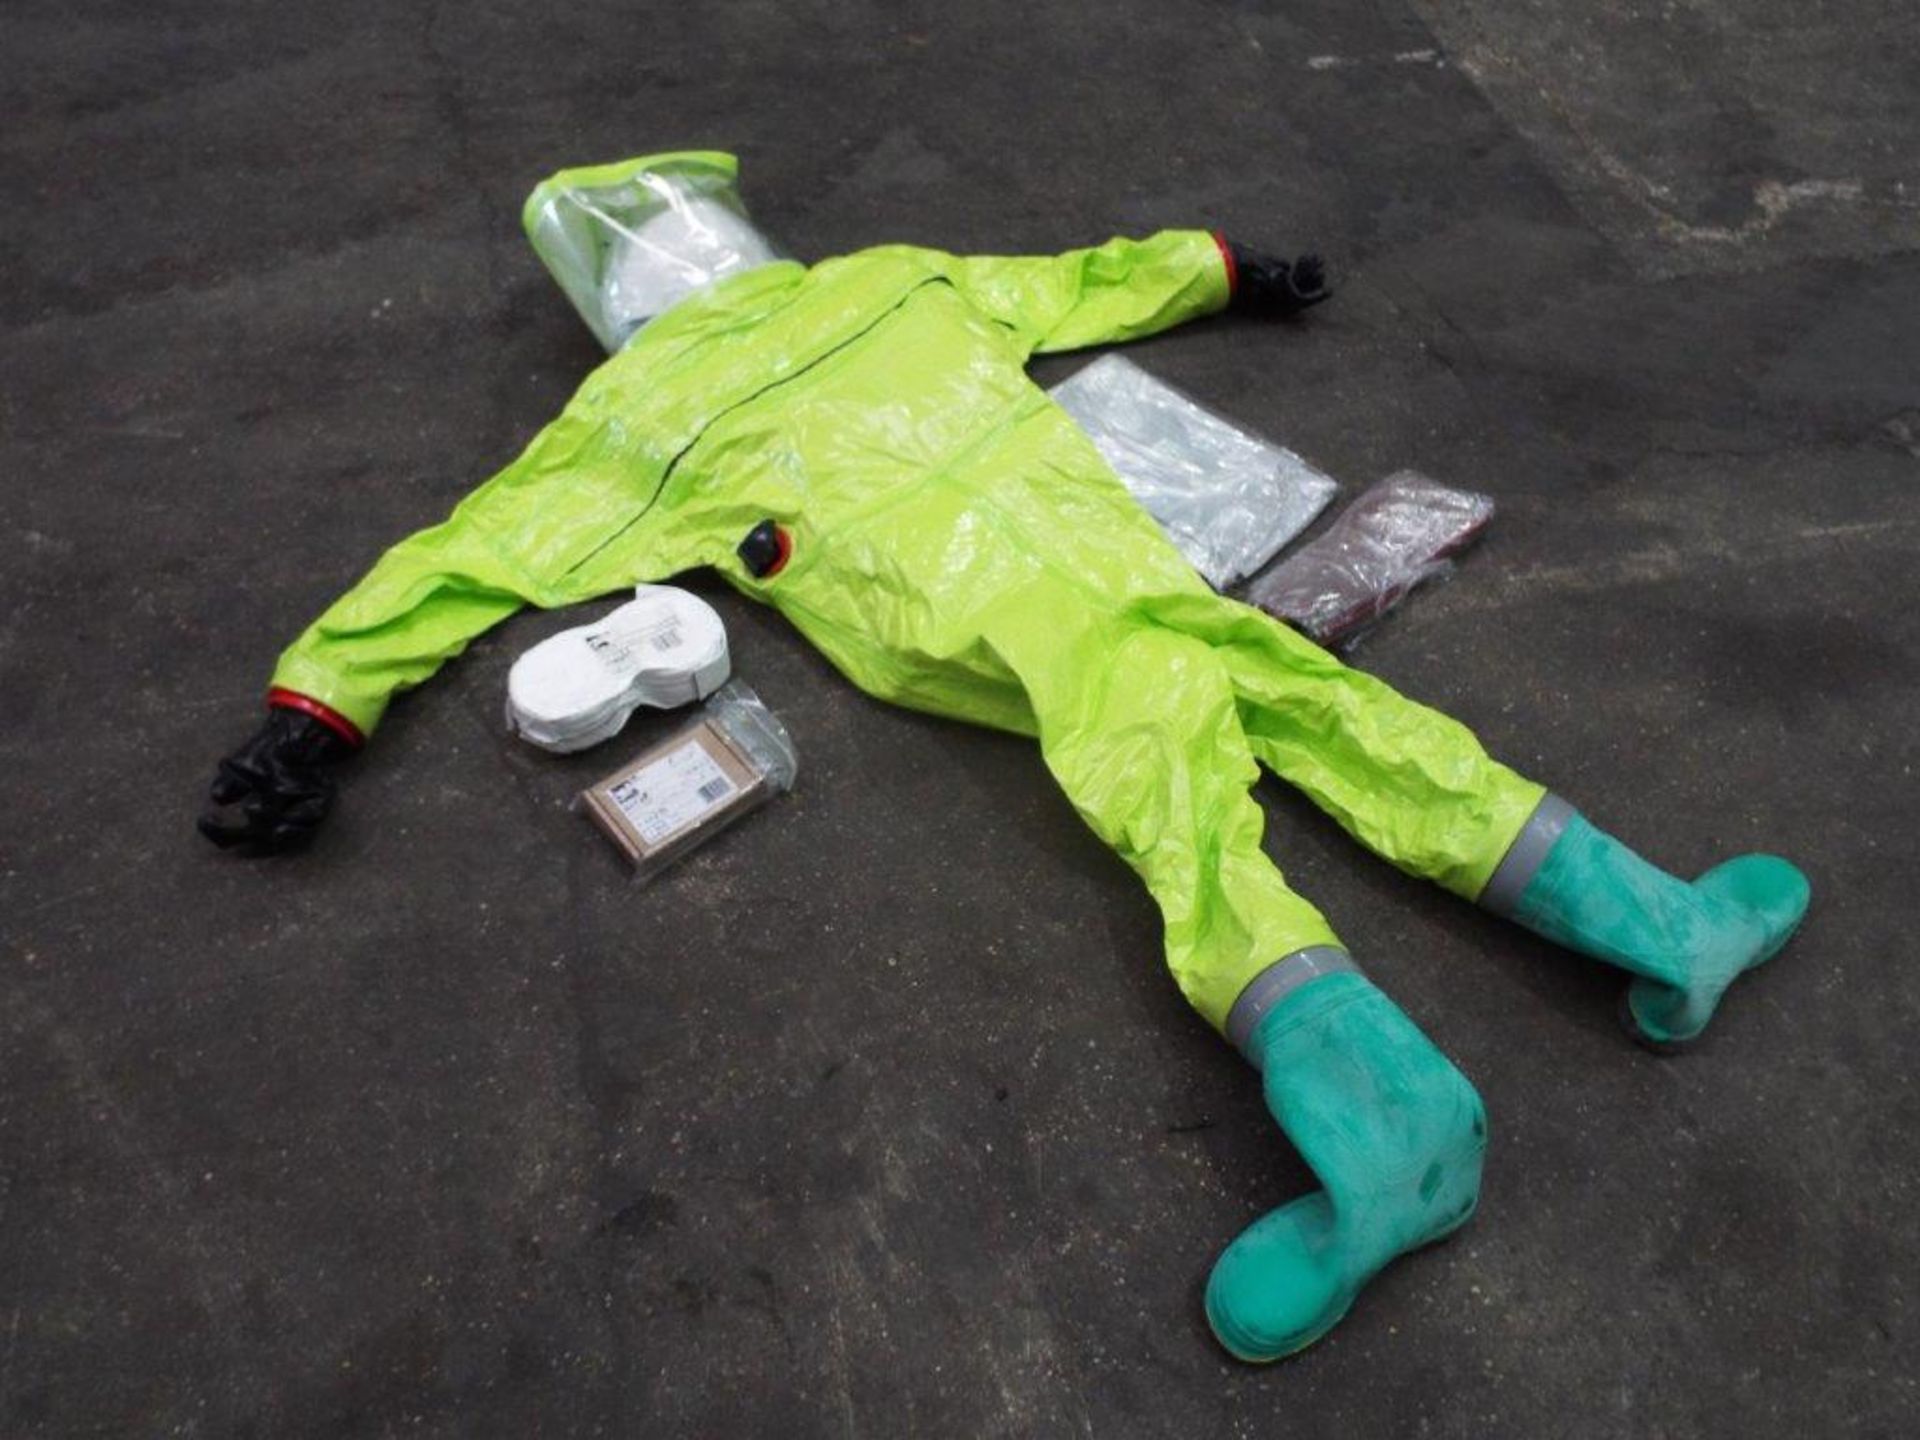 Respirex Powered Decontamination Suit with Attached Boots and Gloves, Helmet, Filters, Battery etc - Image 2 of 17